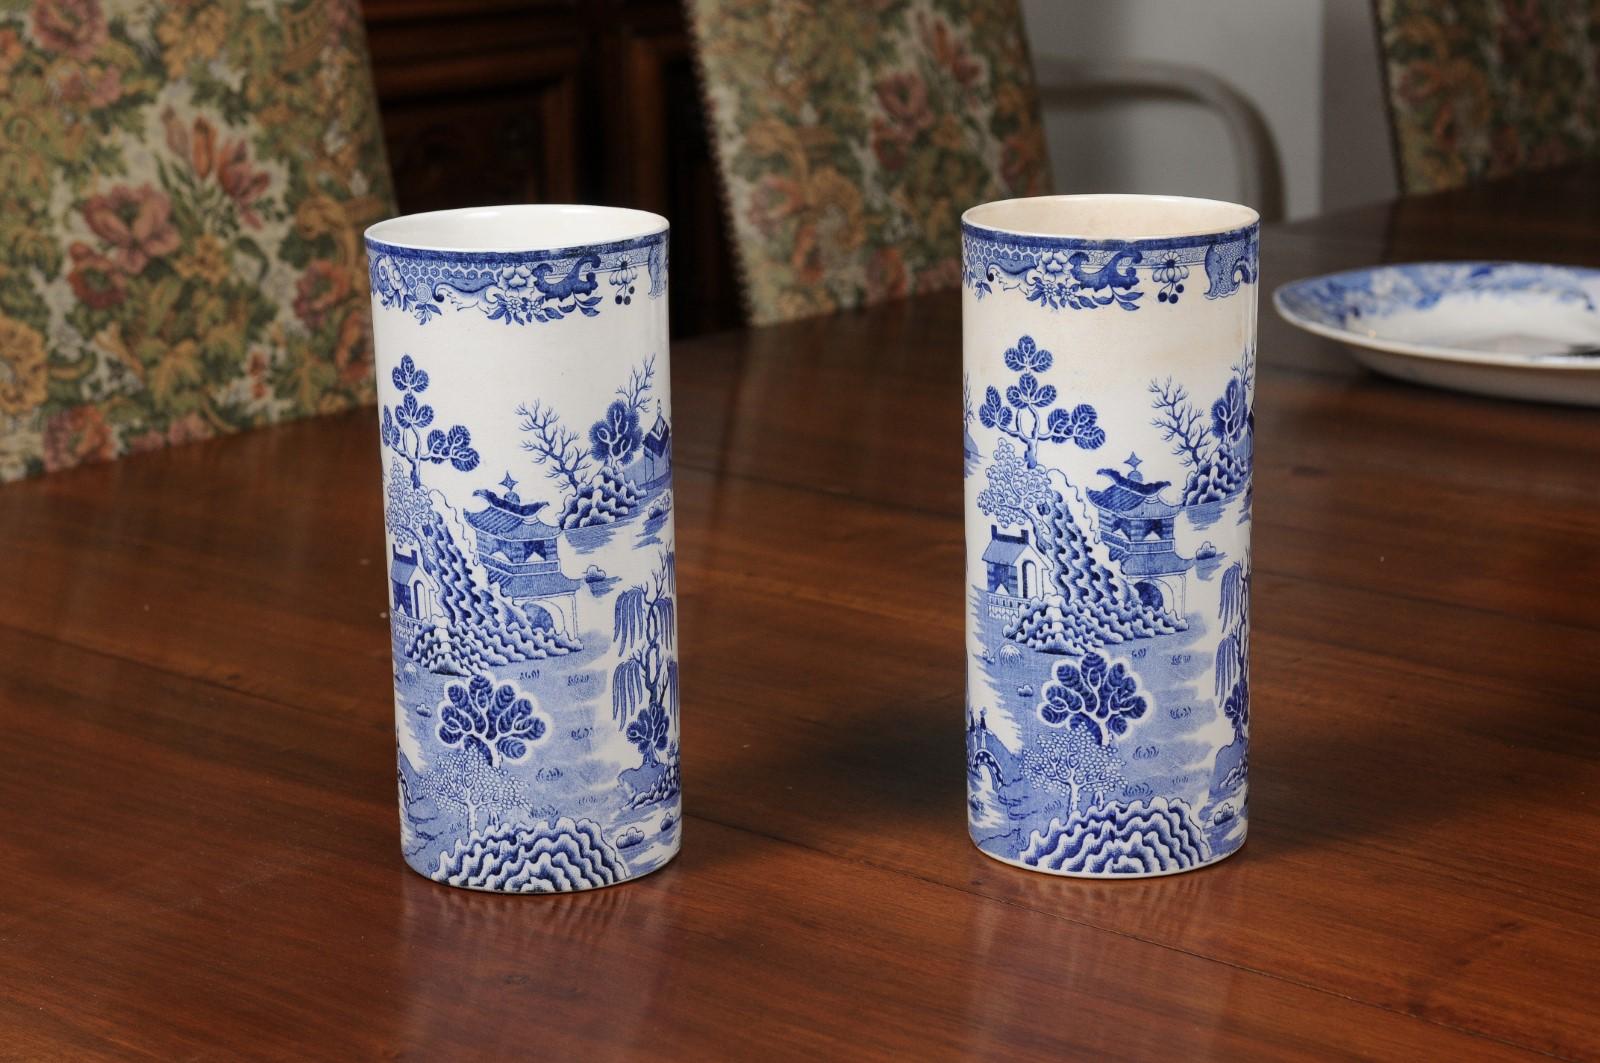 A pair of English blue and white Mason's patent ironstone vases from the 19th century, with chinoiserie decor depicting two fishermen on a bridge surrounded by willow patterns. Born in England during the 19th century, each of this pair of